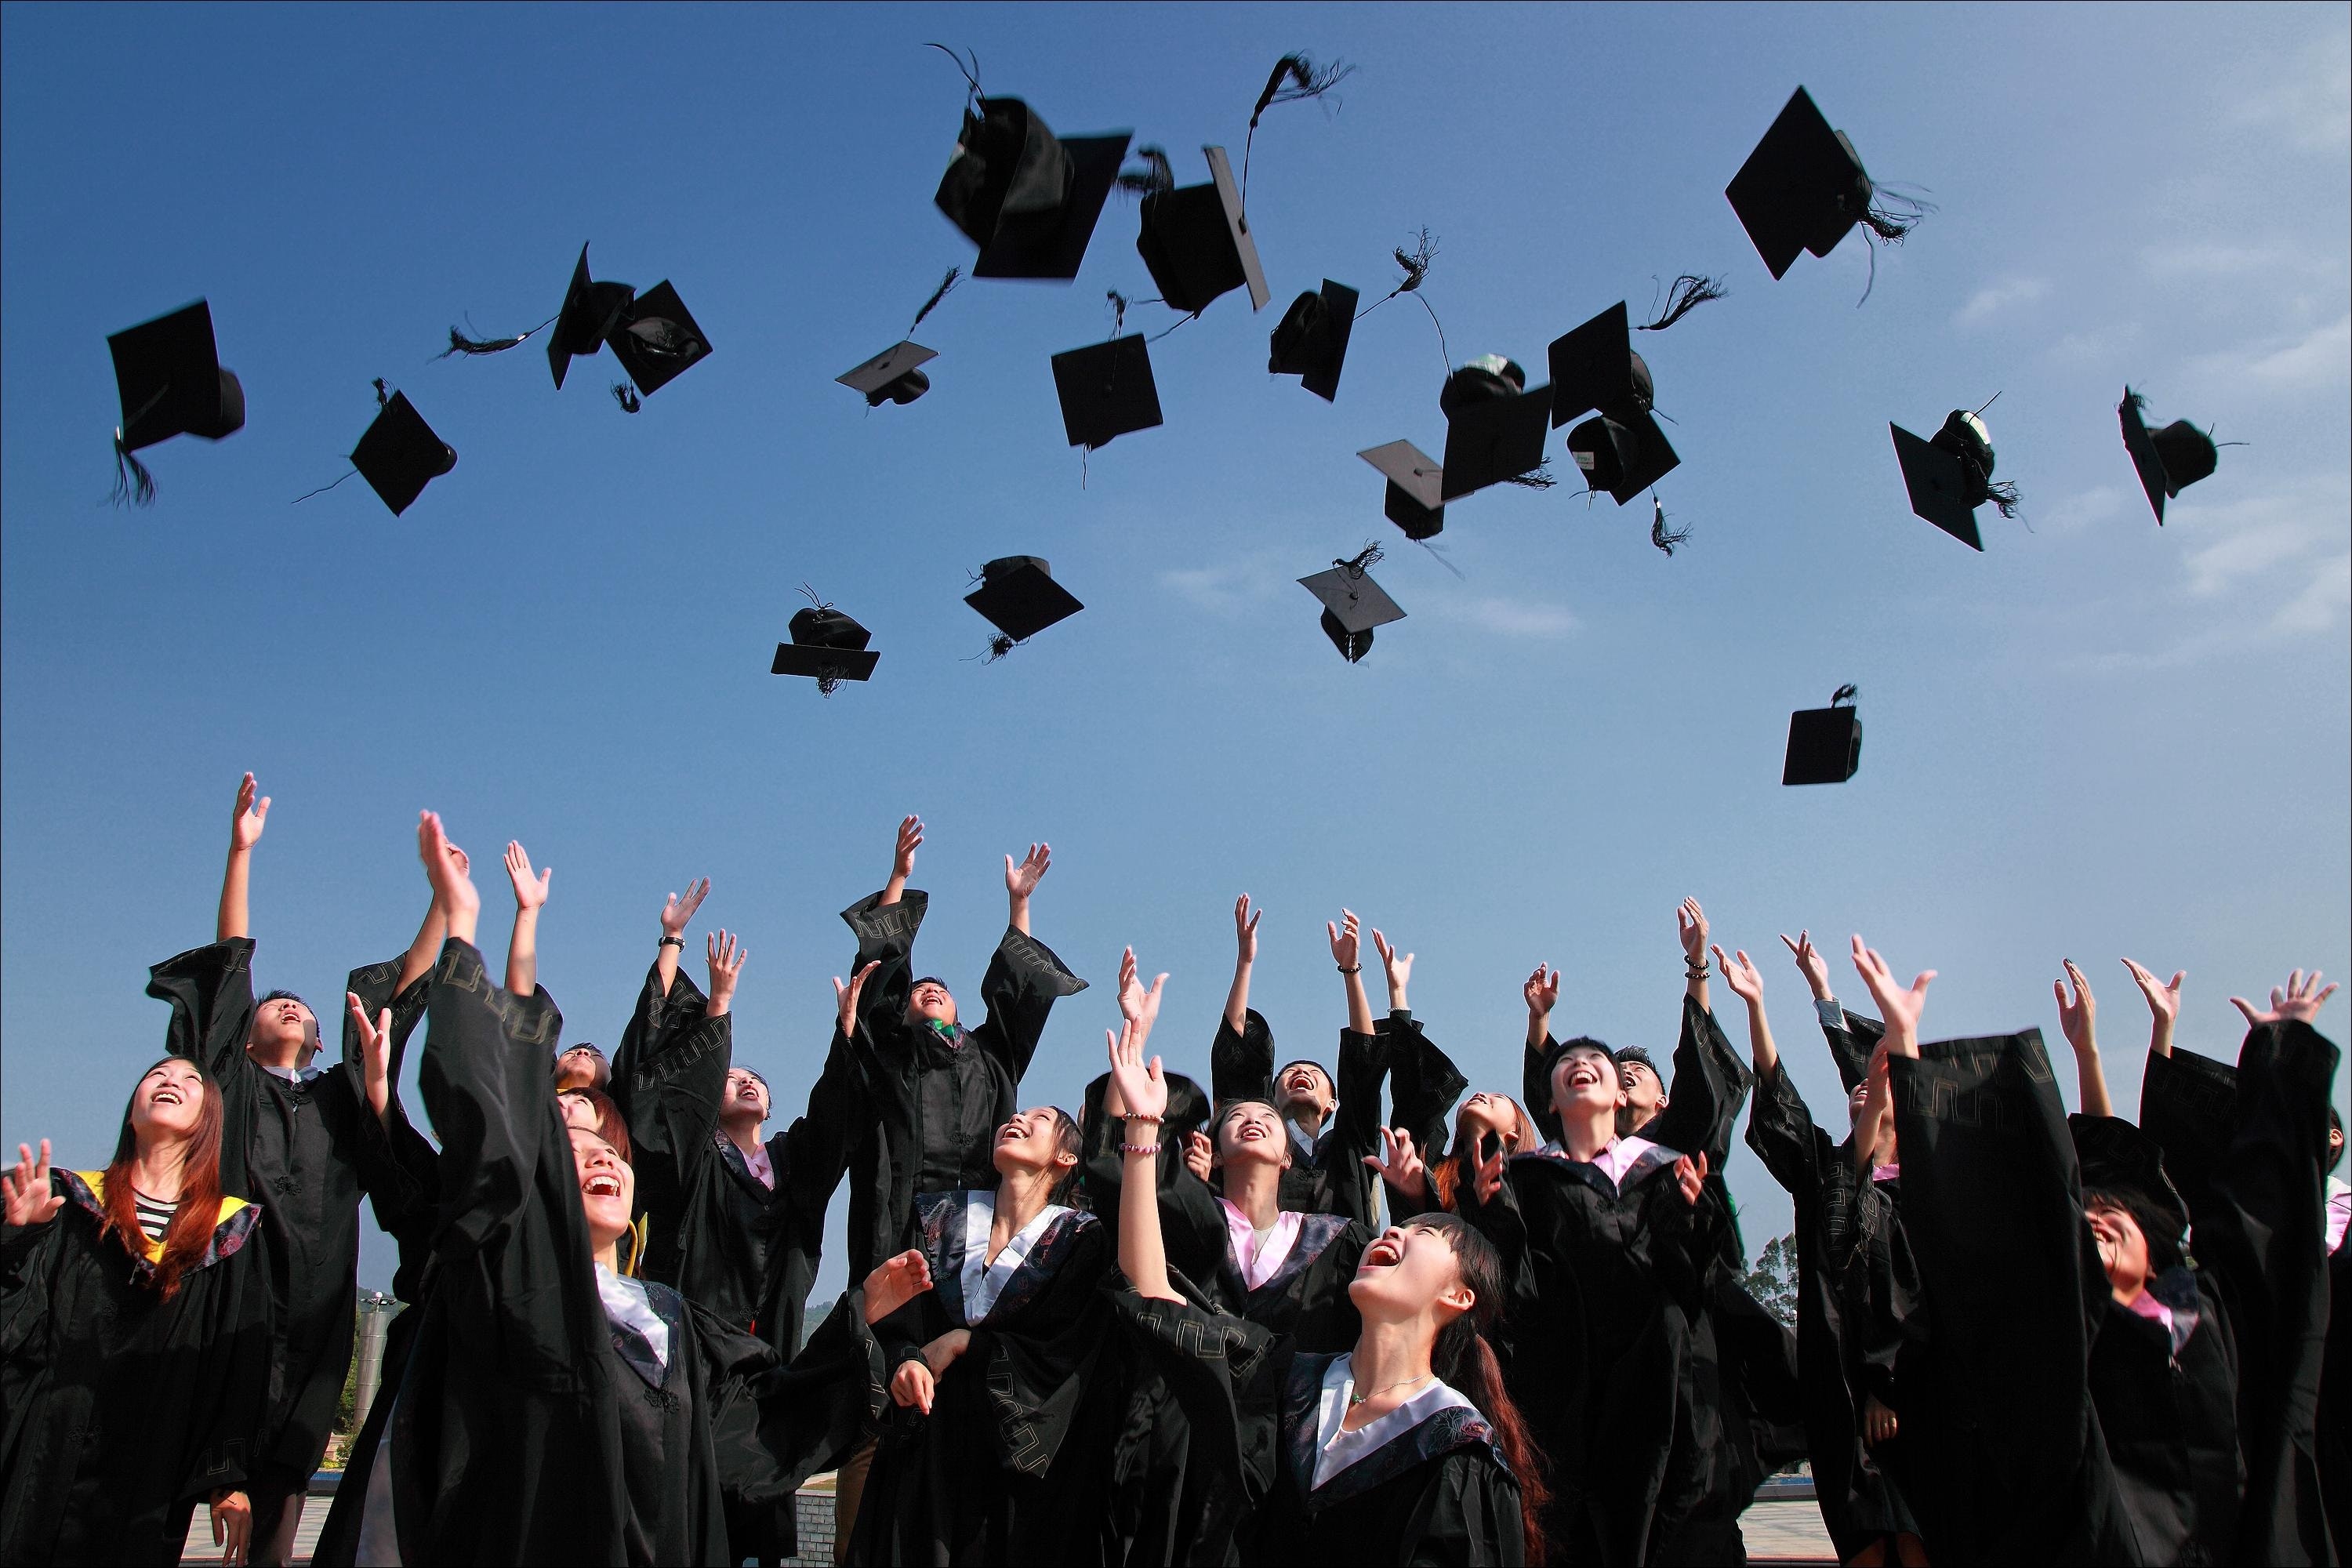 A group of graduations tossing caps in the air